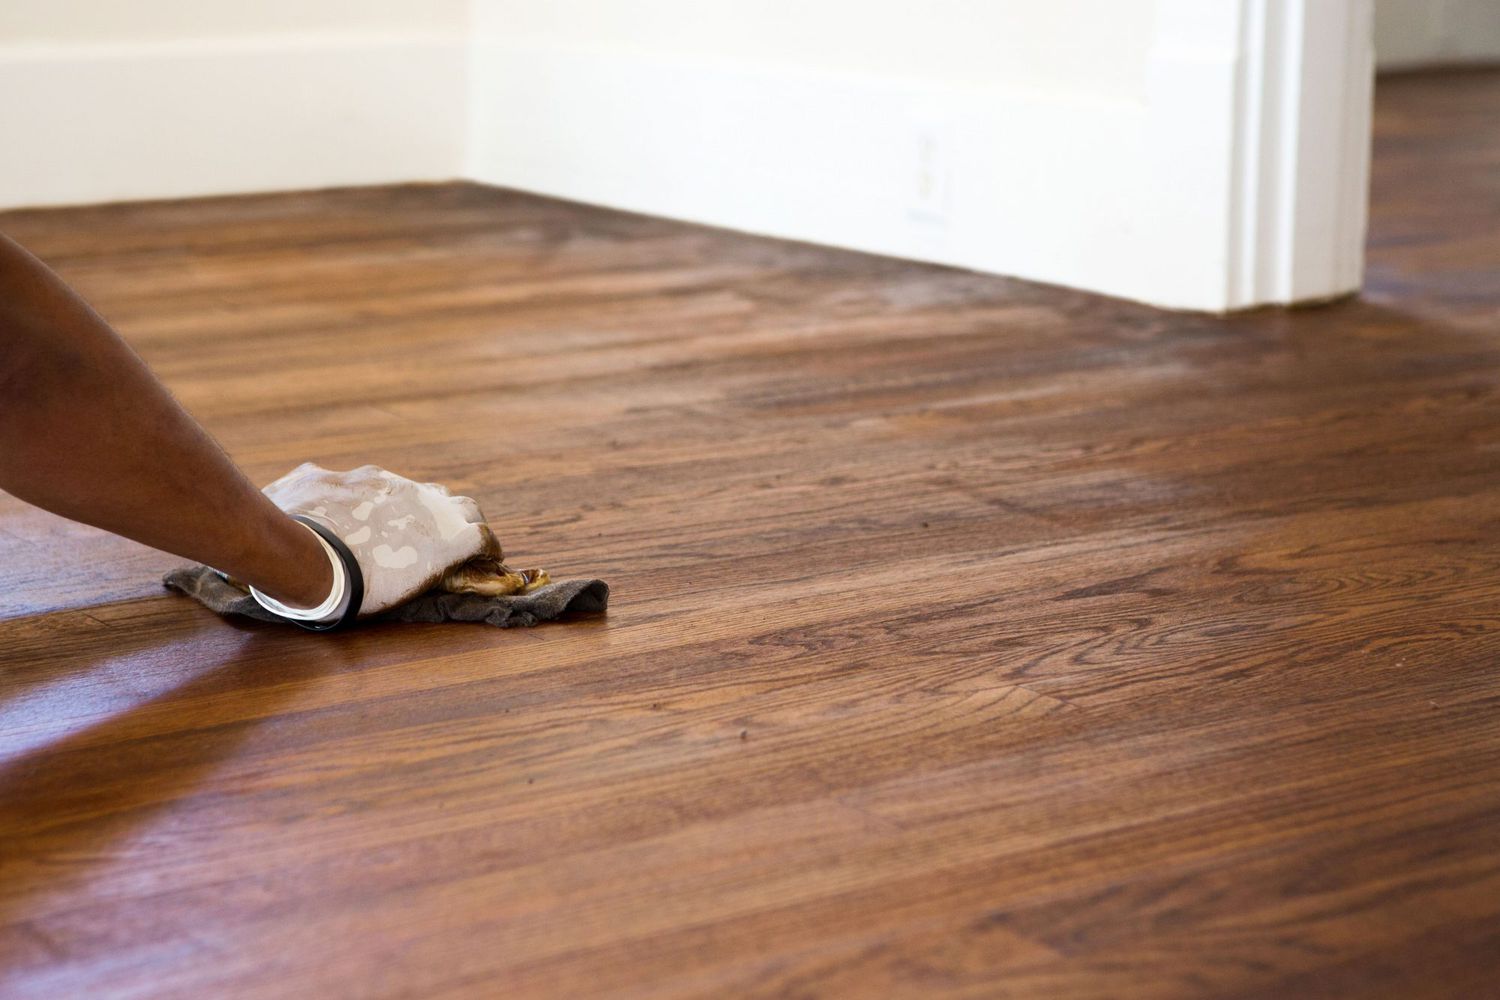 How To Restore Hardwood Floors Without Sanding: A Step-by-step Guide